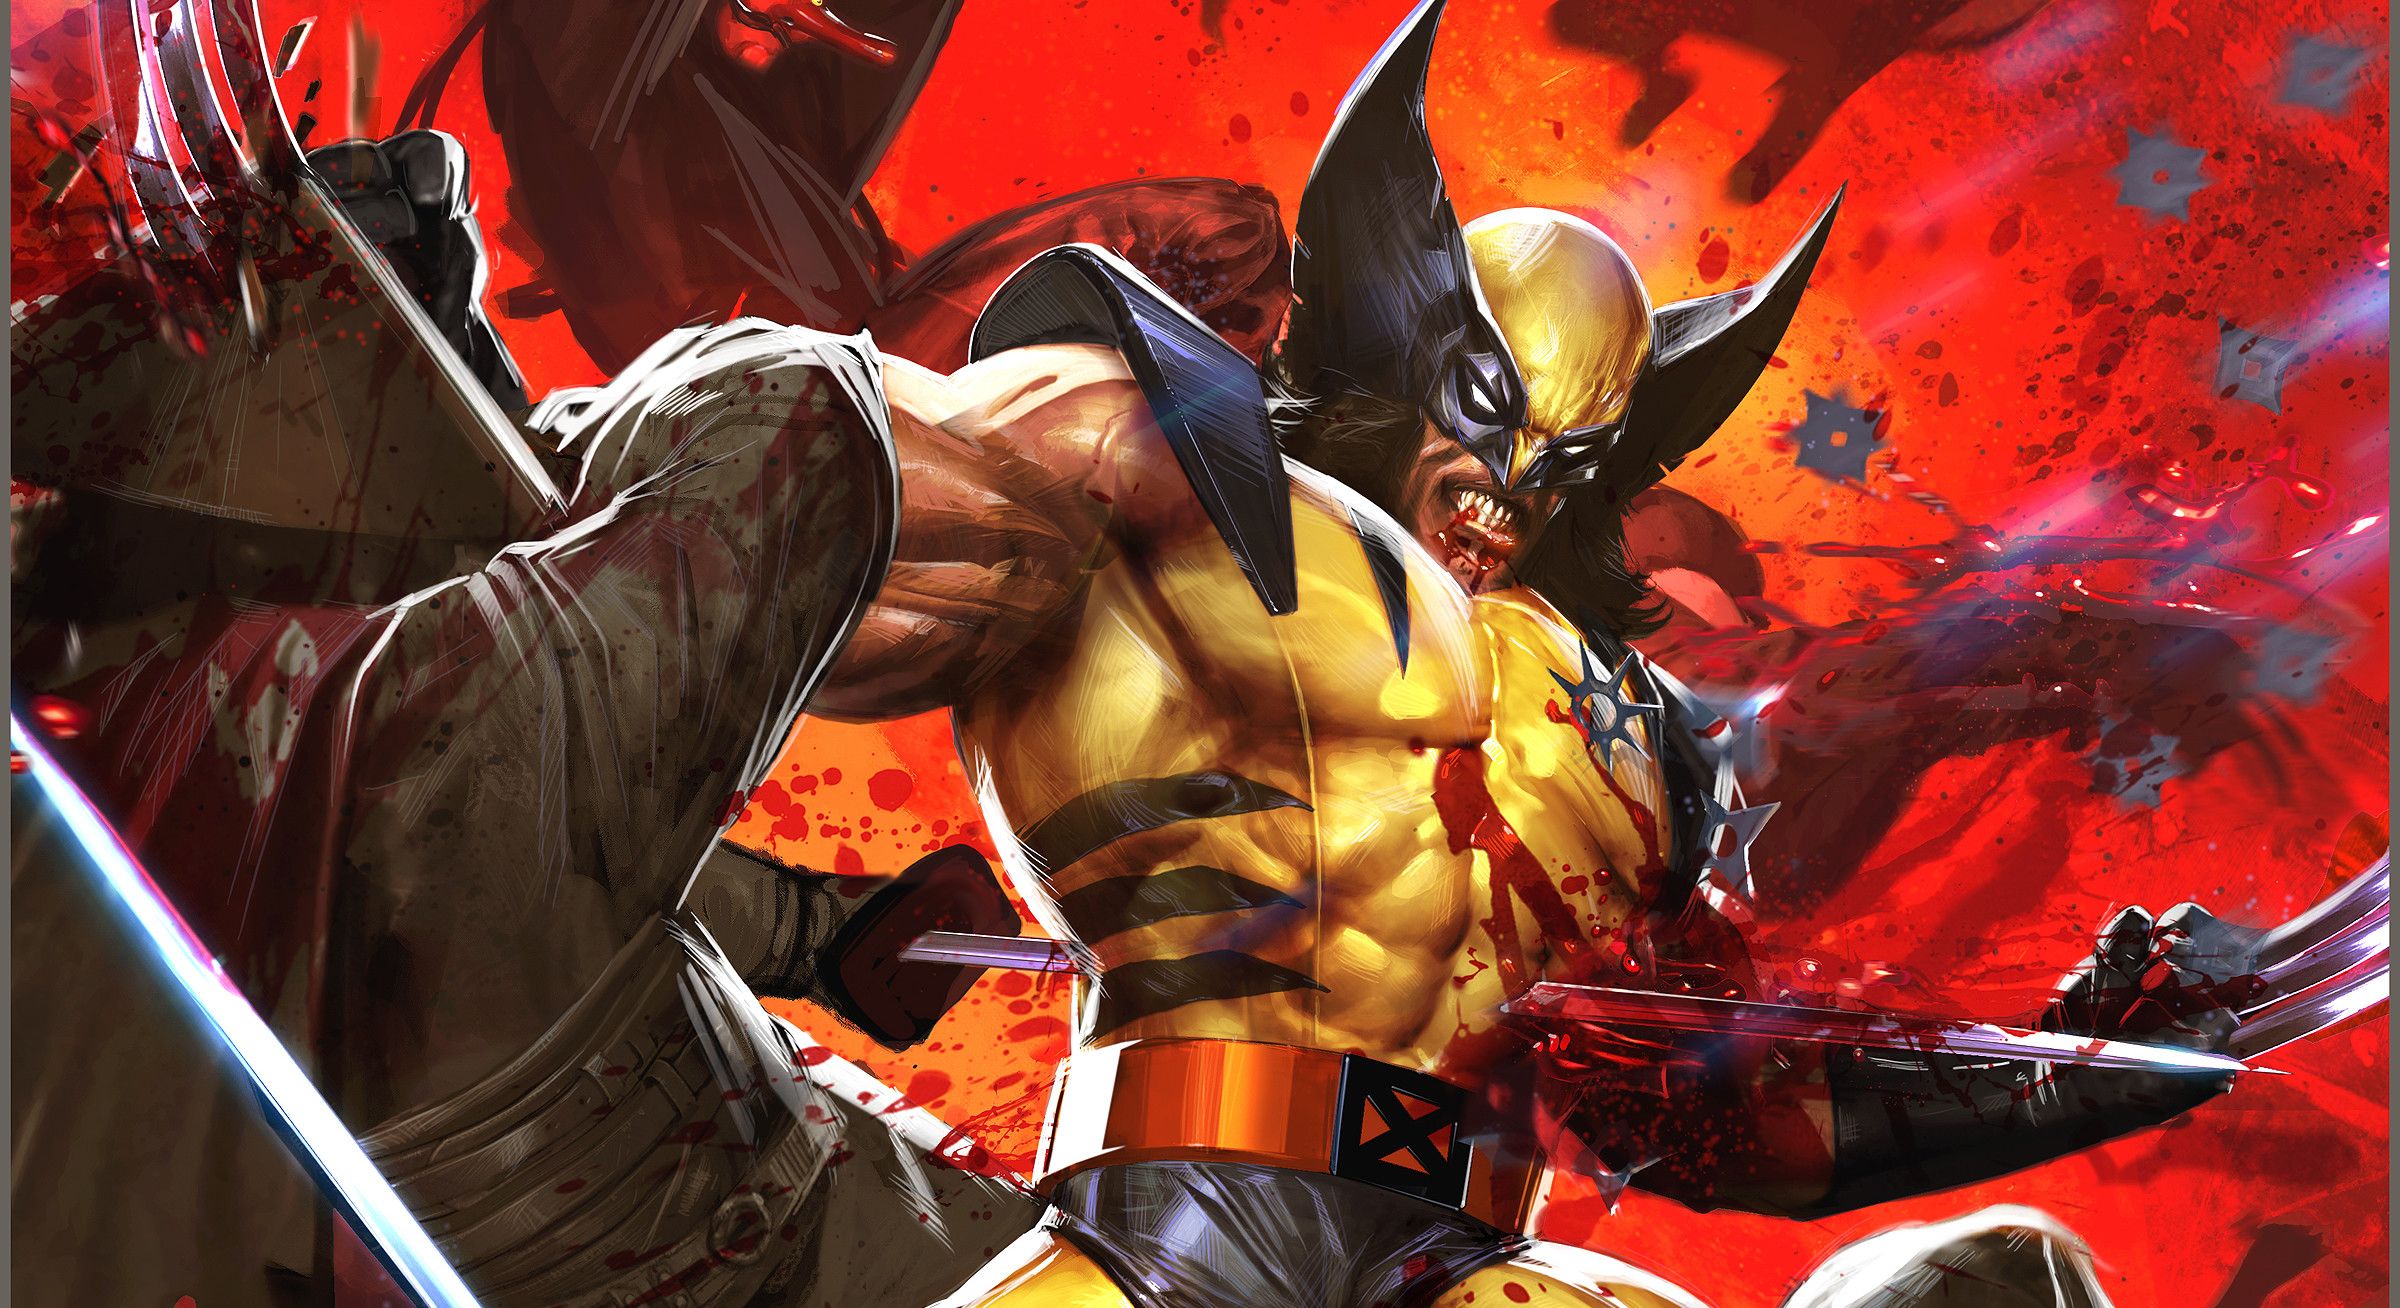 Wolverine Comic Wallpapers